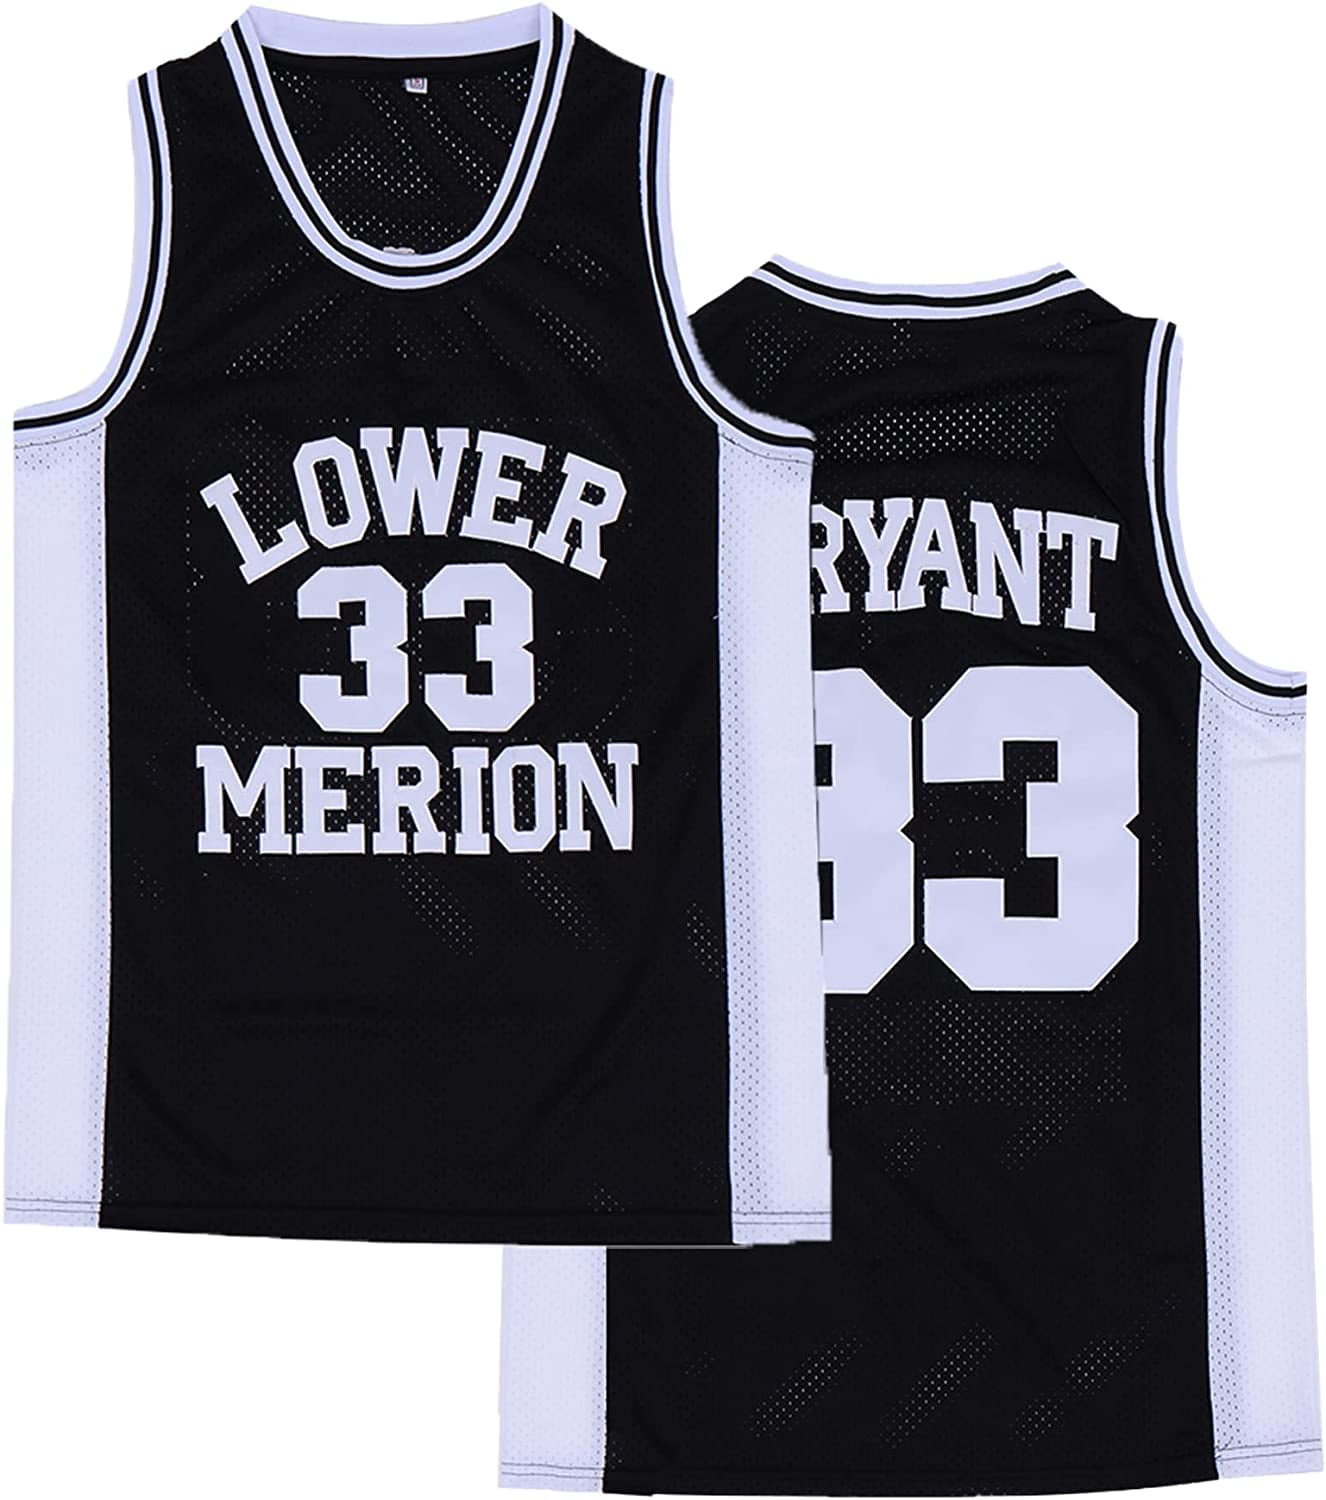 Mens Vintage 33 Bryant Lower Merion High School Basketball Jerseys Red  Black White Stitched Shirts S XXL From Redtradesport, $20.73